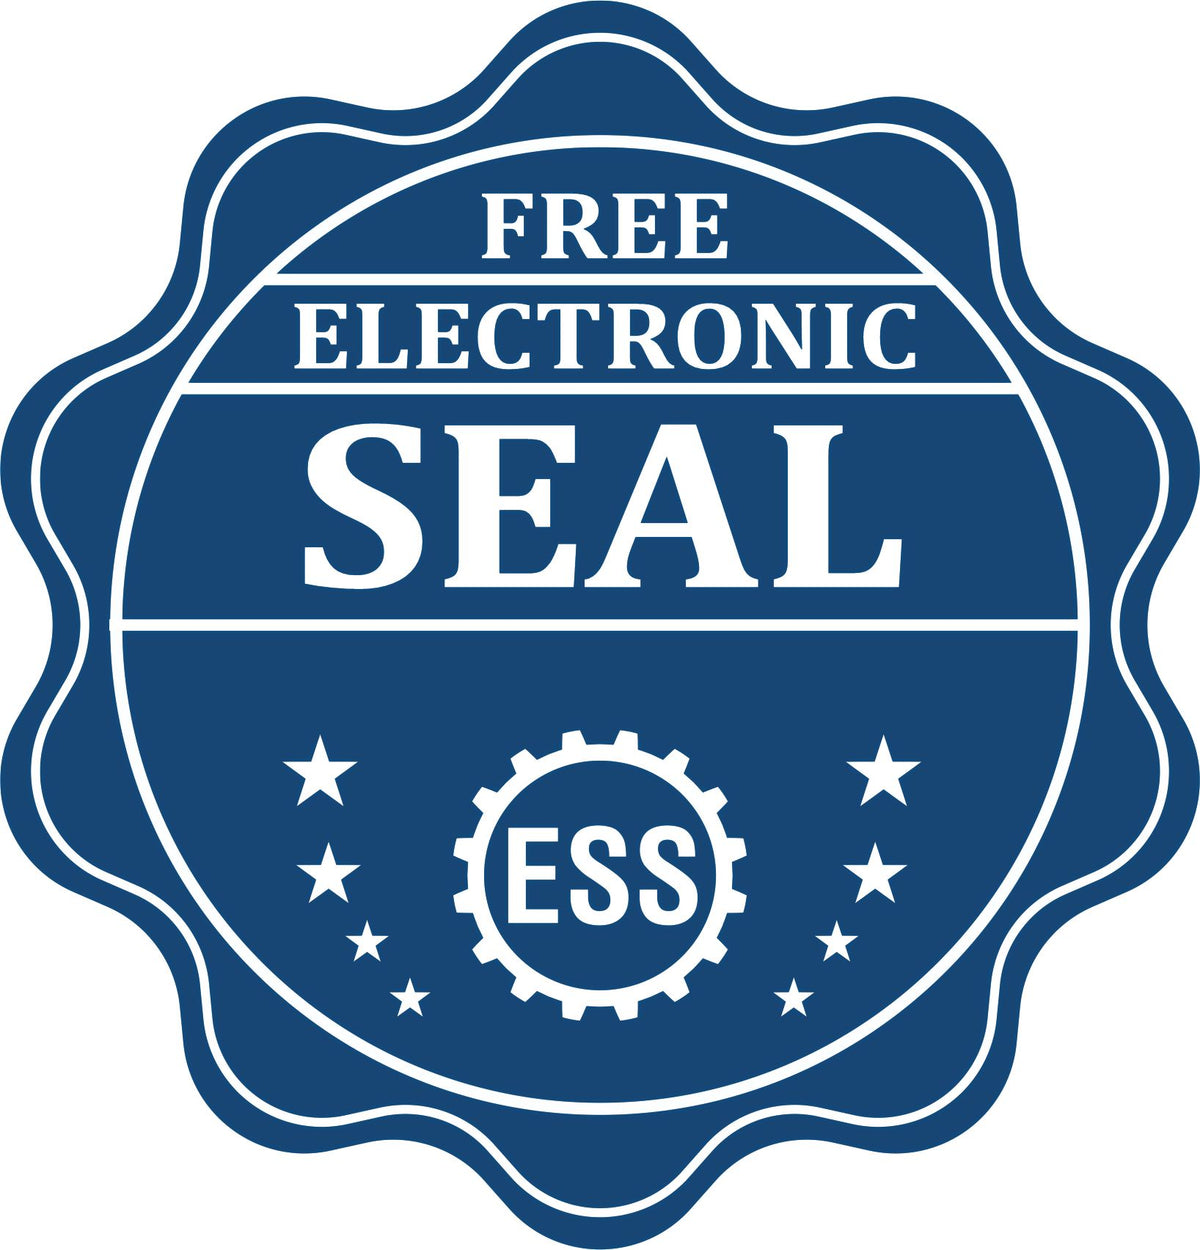 A badge showing a free electronic seal for the State of New York Long Reach Architectural Embossing Seal with stars and the ESS gear on the emblem.